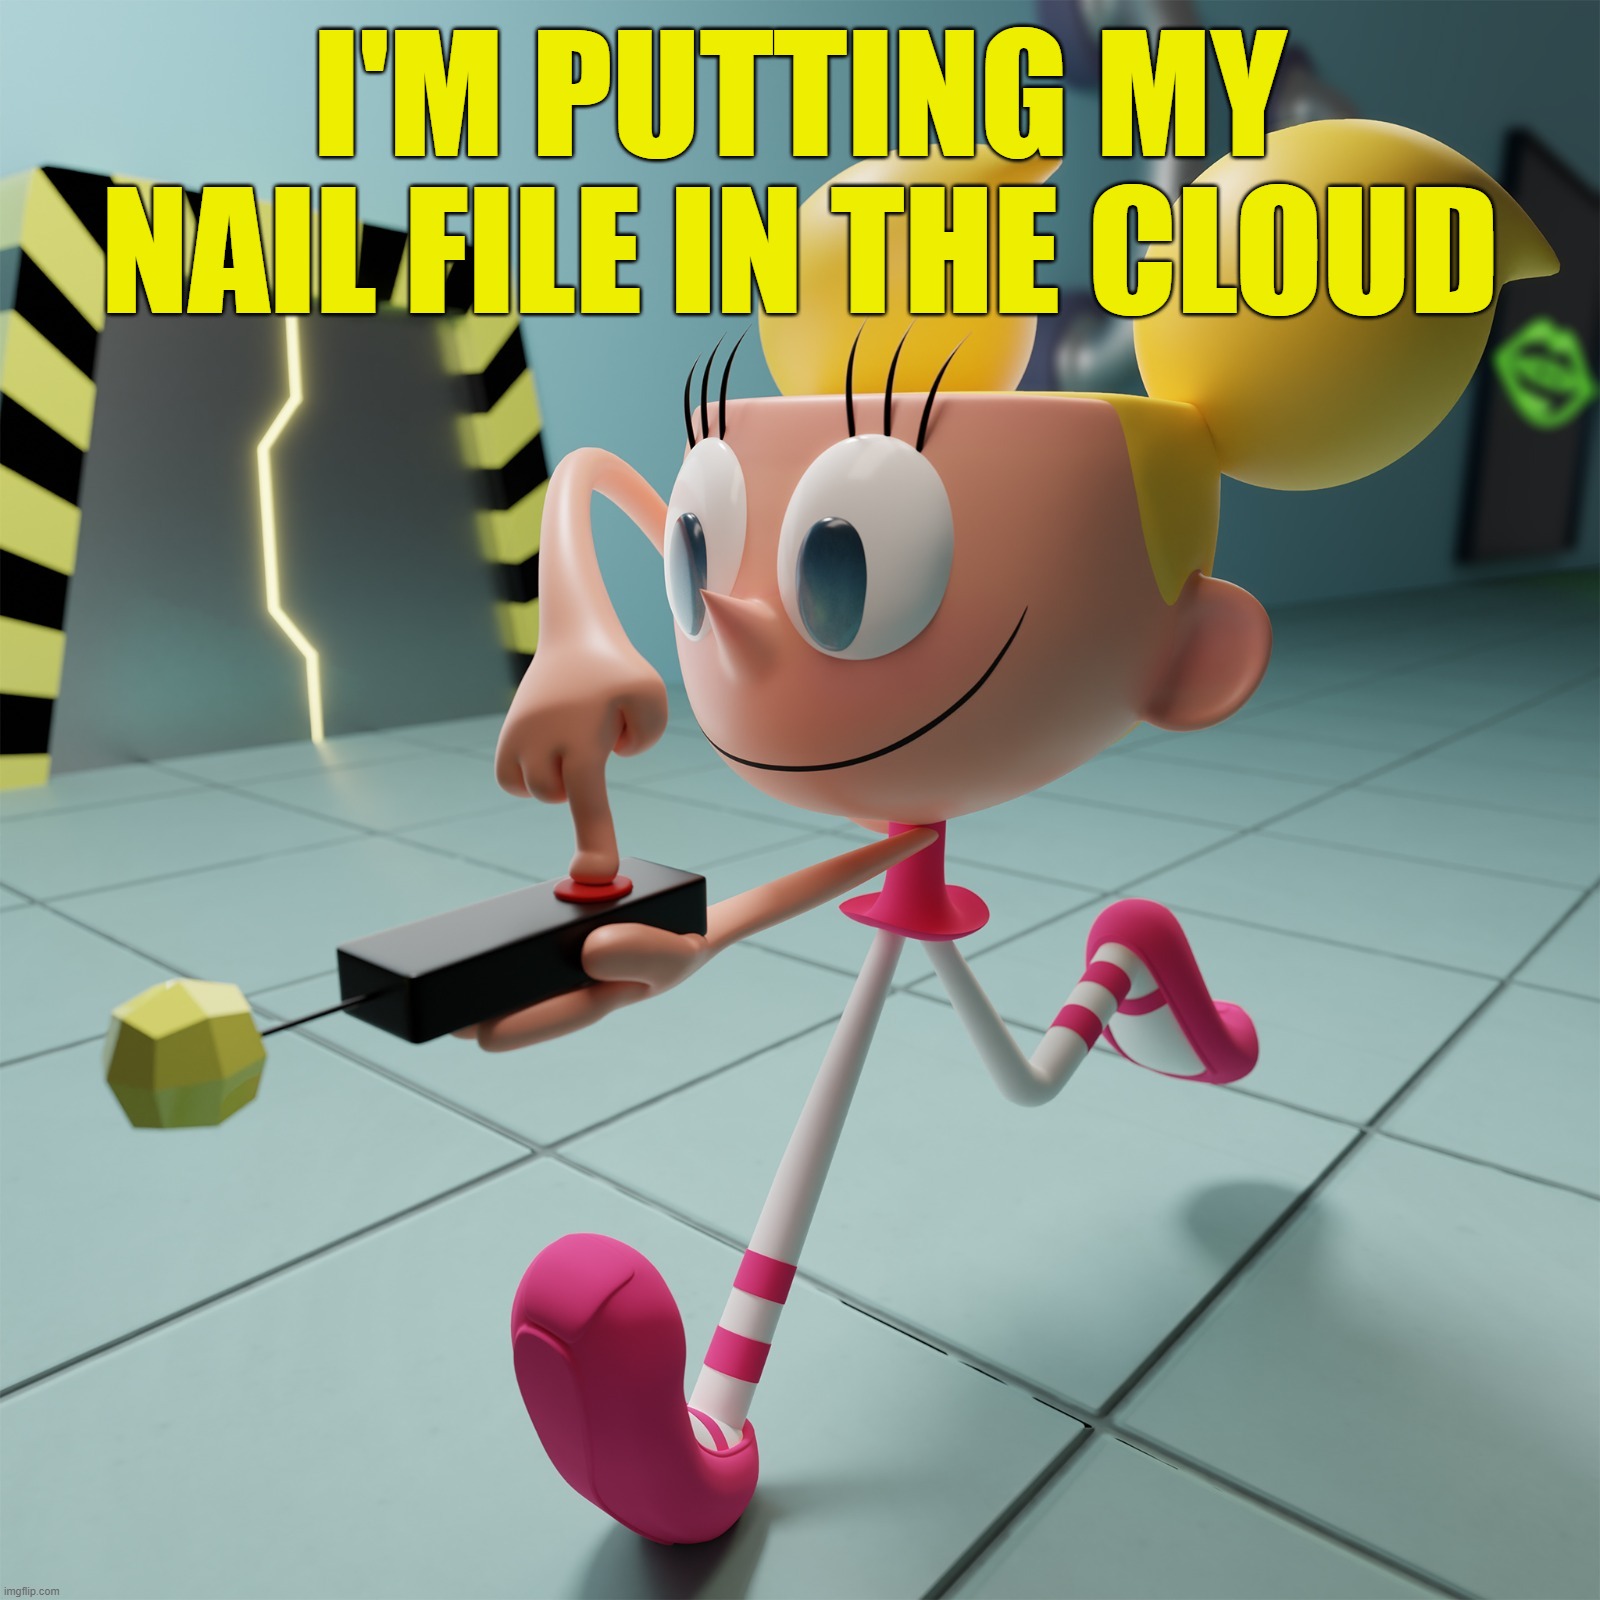 Dexter's lab | I'M PUTTING MY NAIL FILE IN THE CLOUD | image tagged in dexter's lab | made w/ Imgflip meme maker